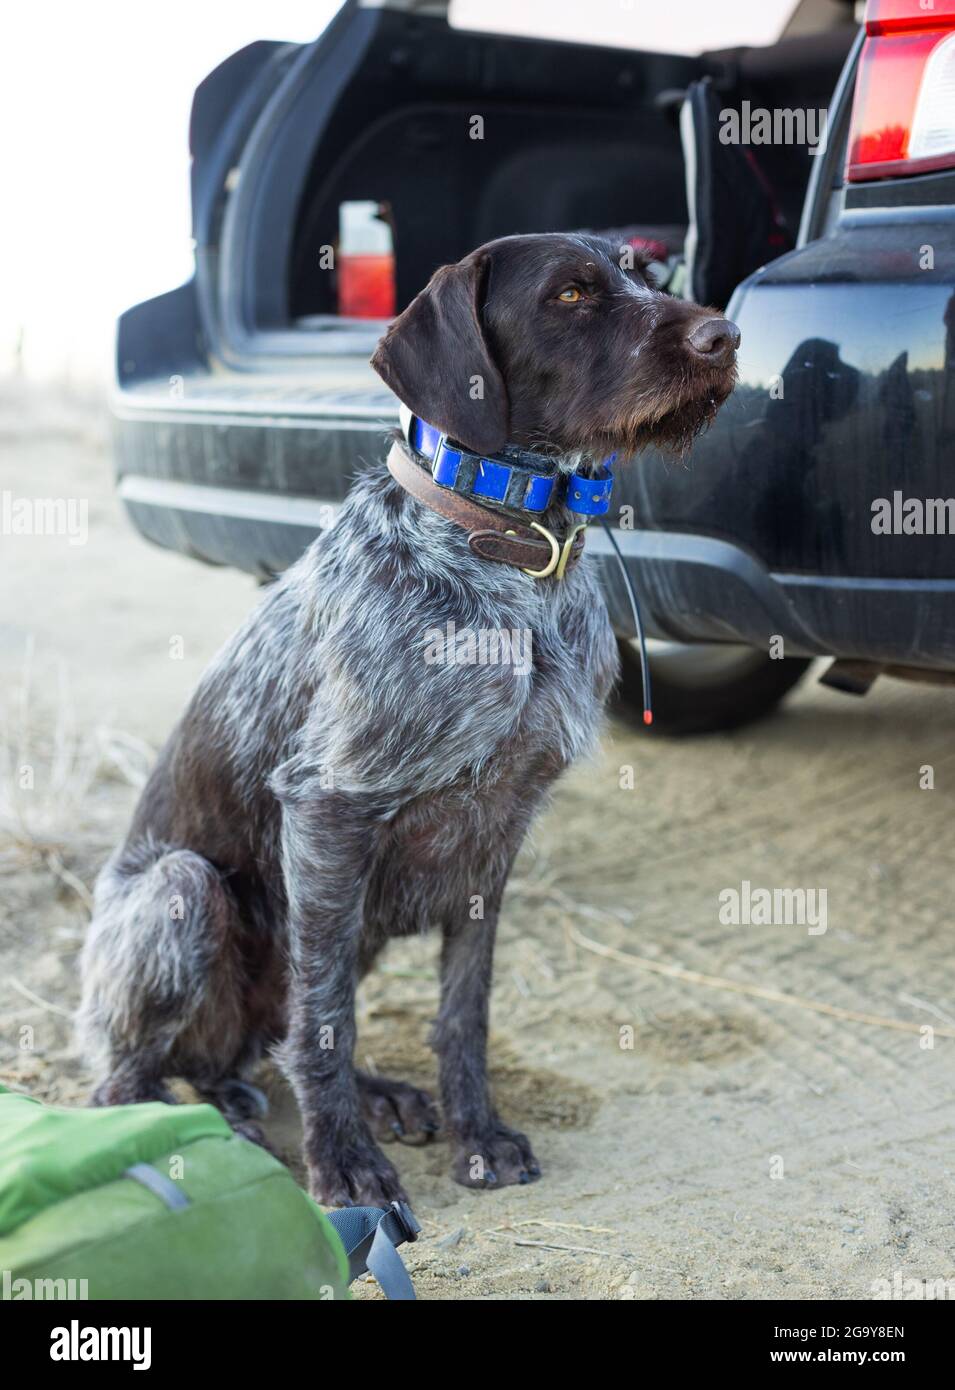 German wirehaired pointer dog sitting by a car, USA Stock Photo